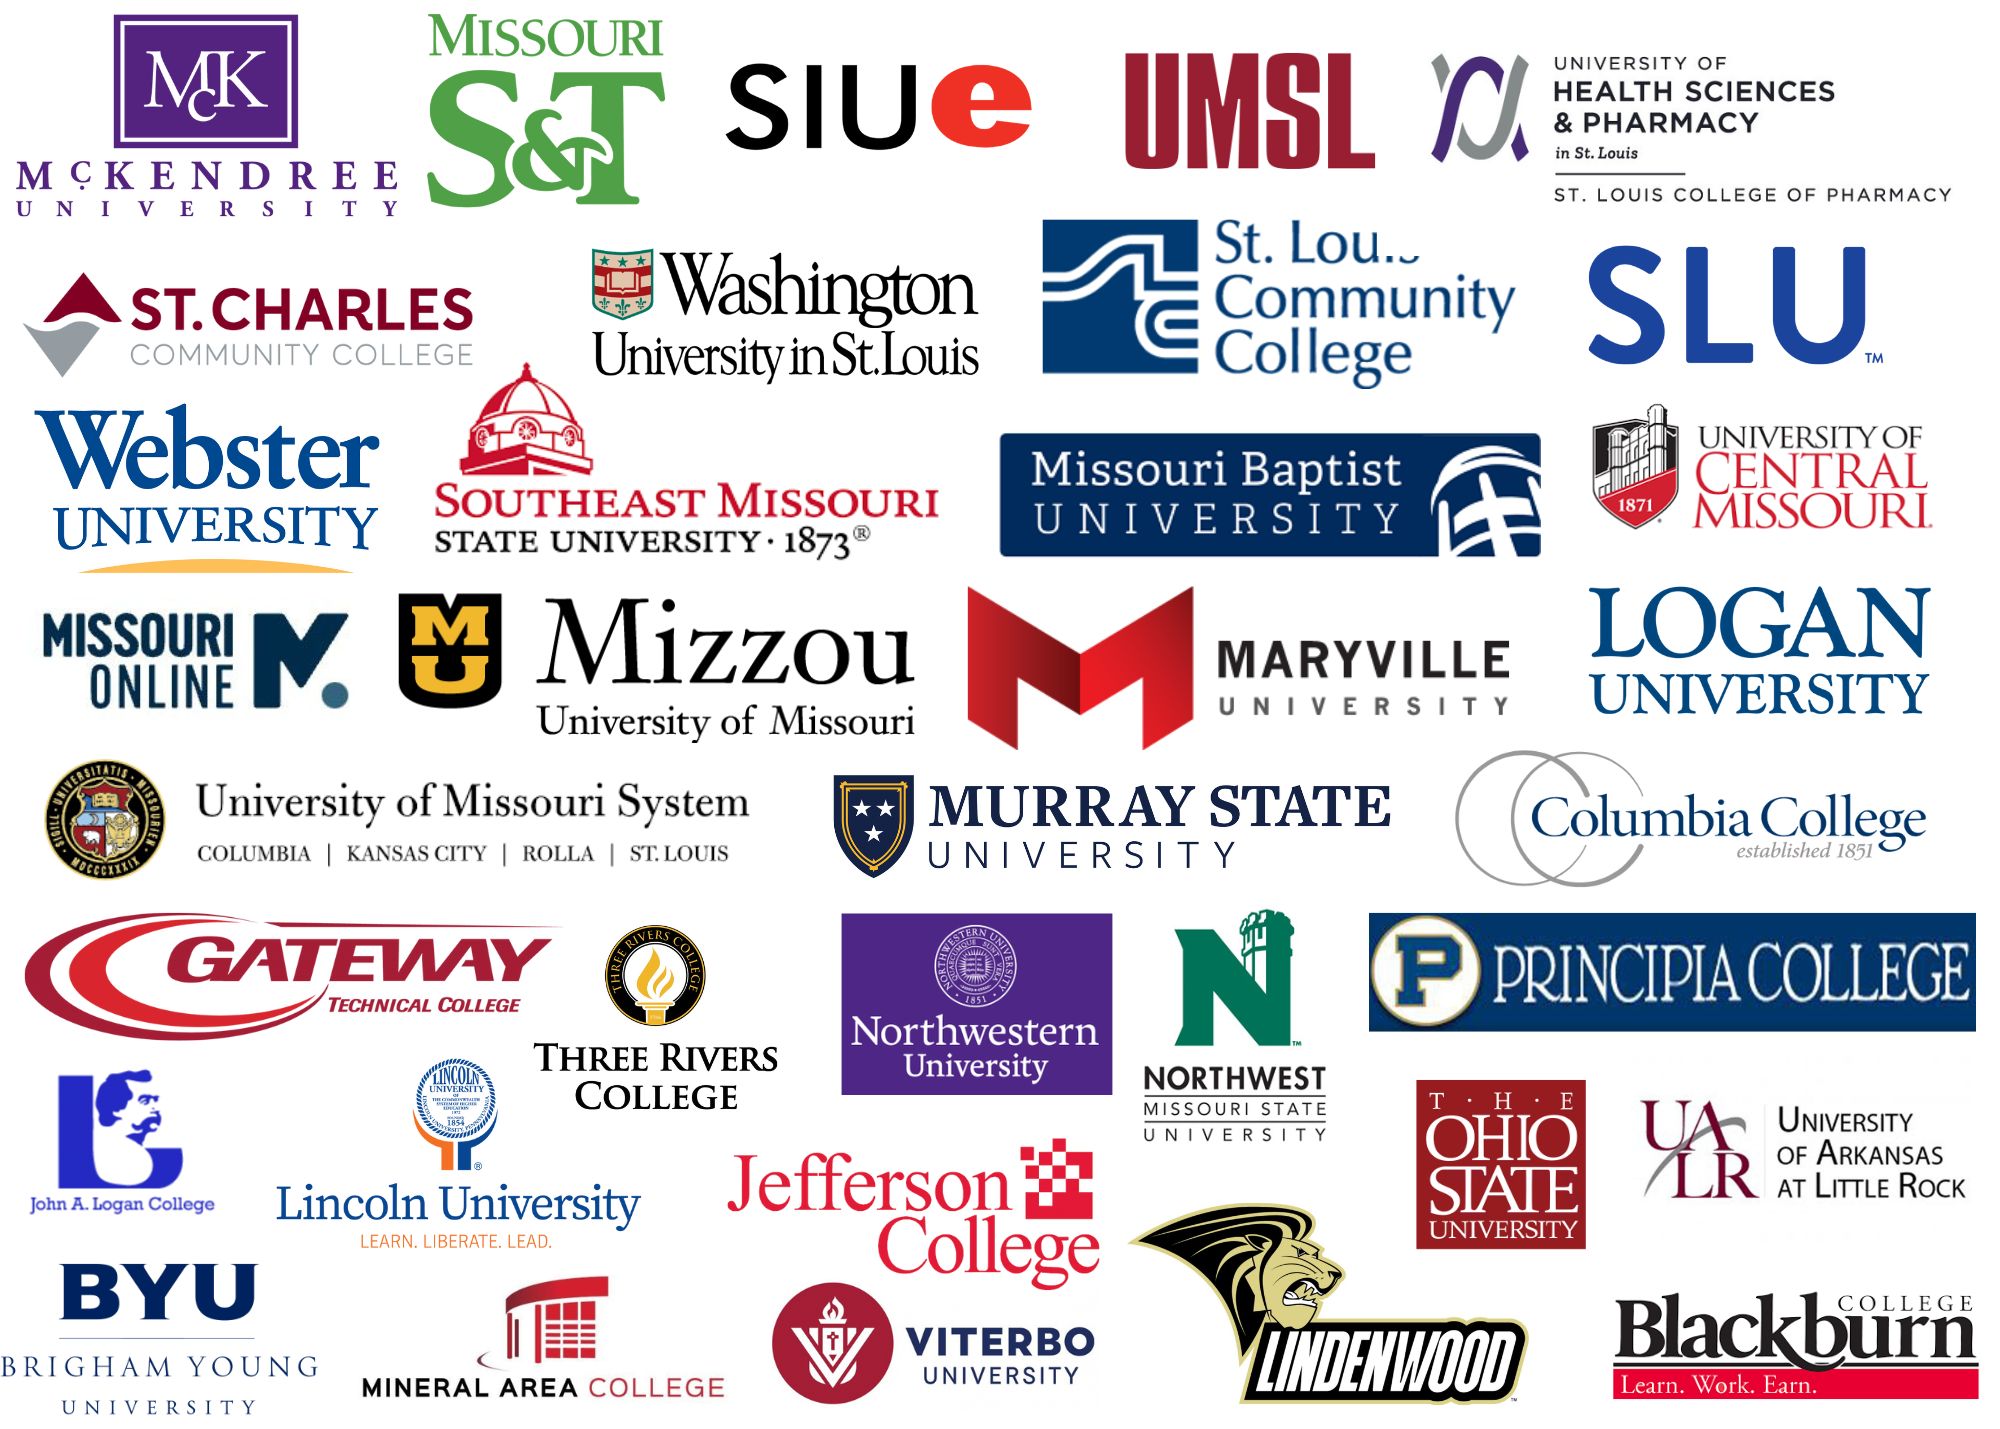 Logos from several regional institutions who regularly attend FTTC